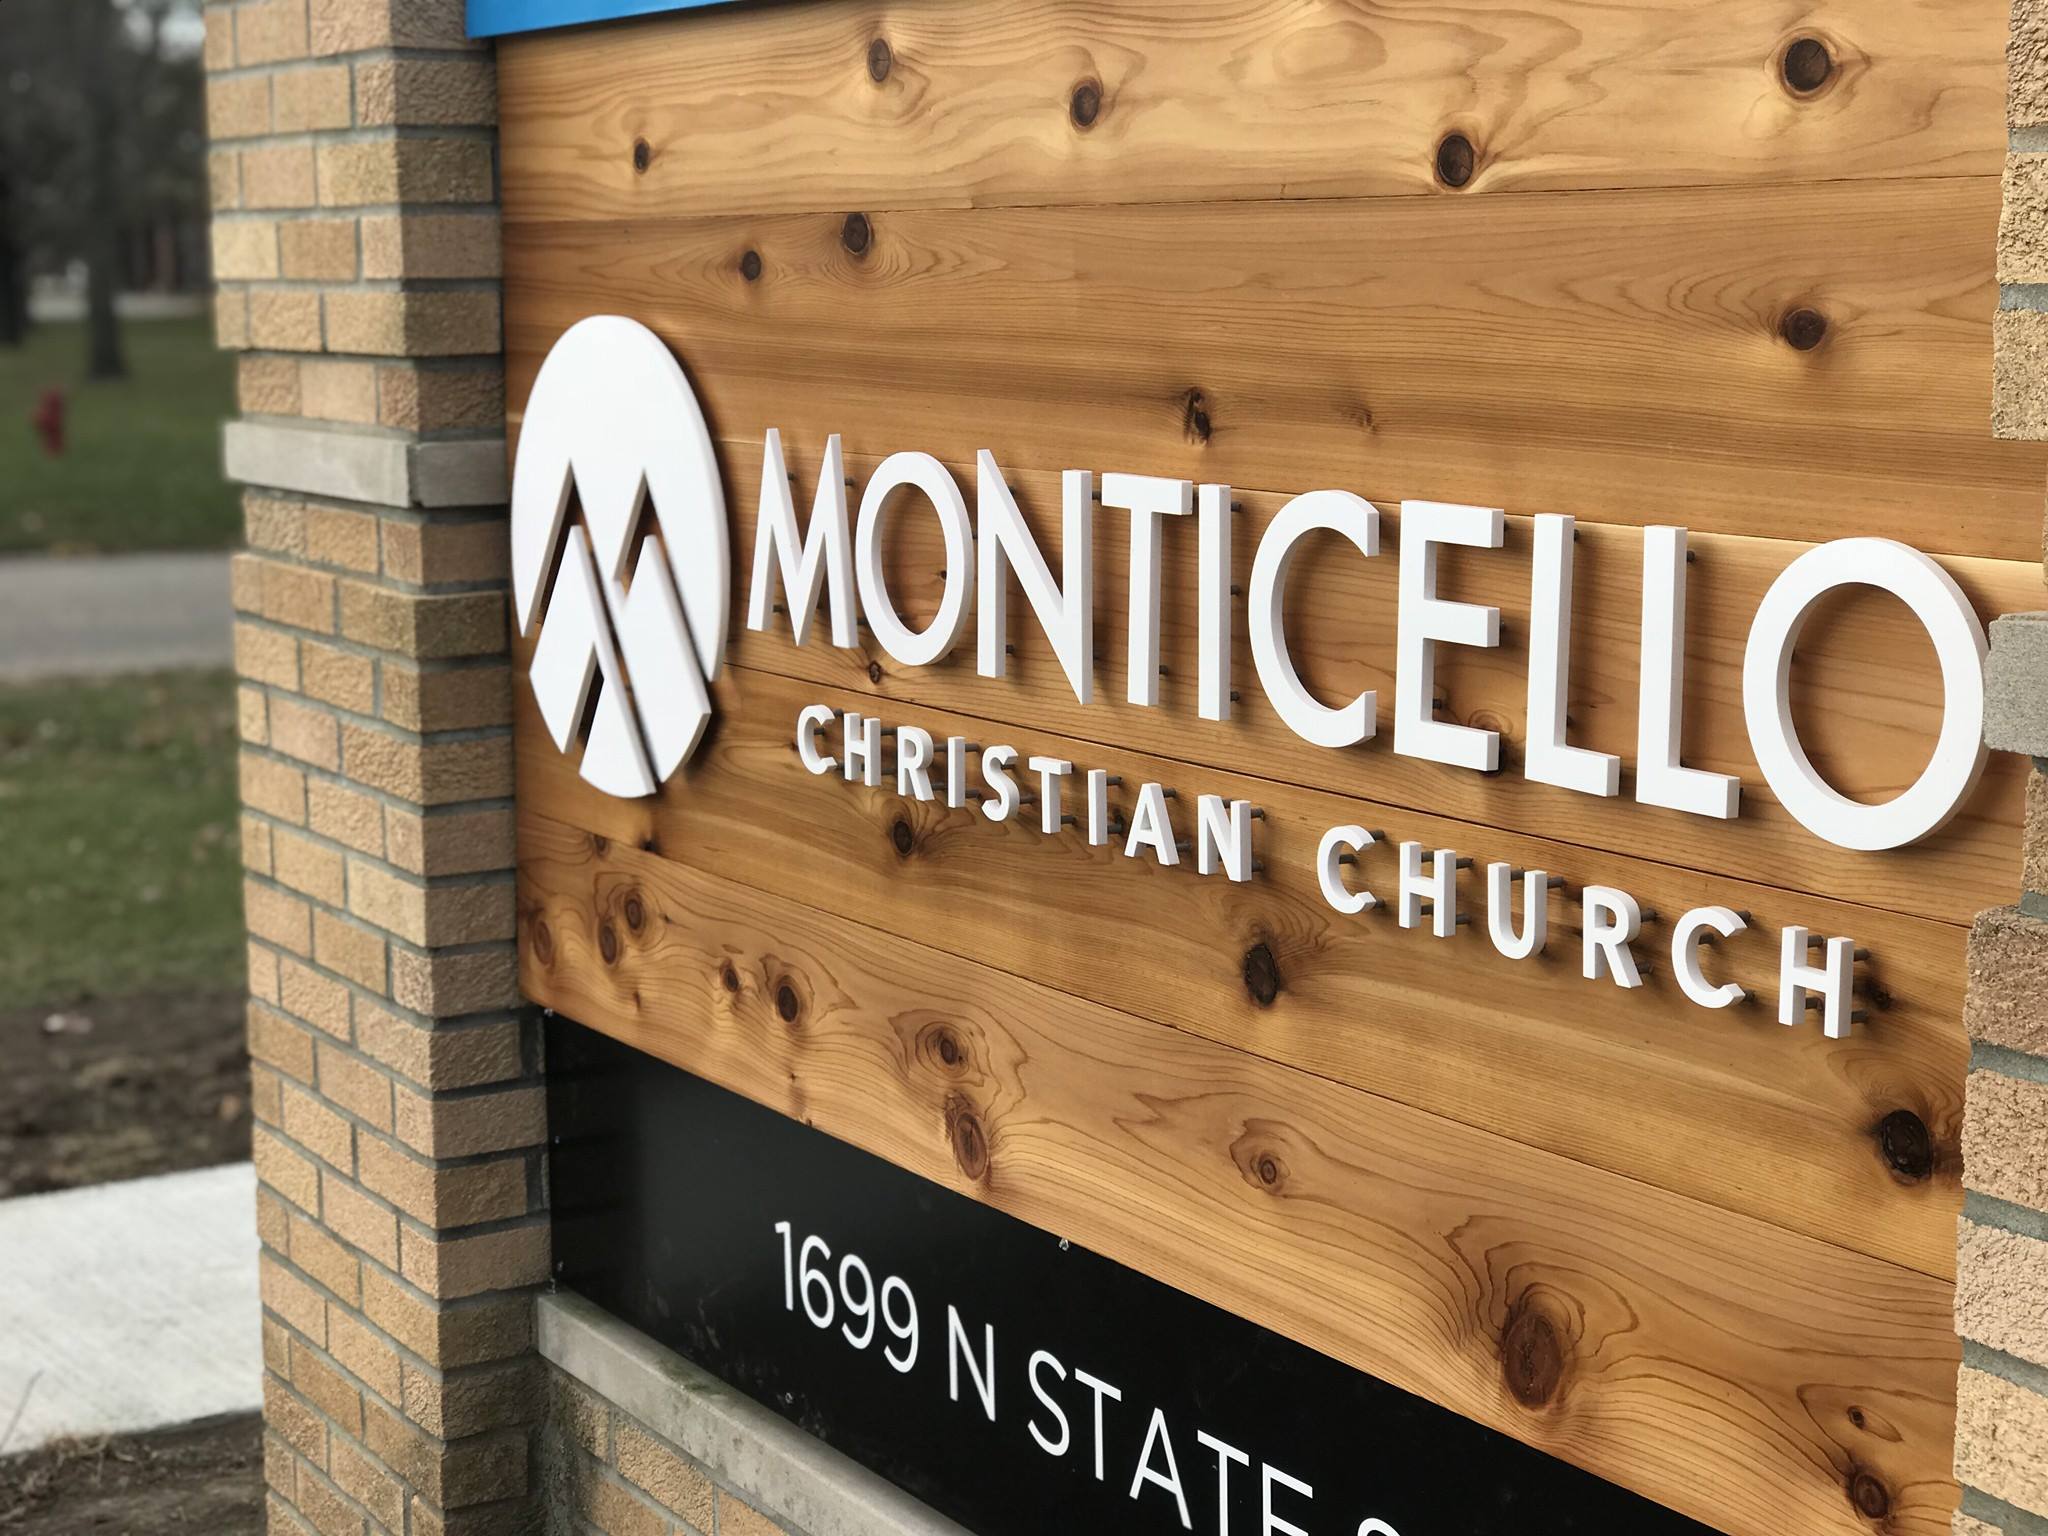 Big Picture Imagery Signs and Service - Monticello Christian Church - Monticello IL - Laser Cut Acrylic - Signage Assembly.jpg